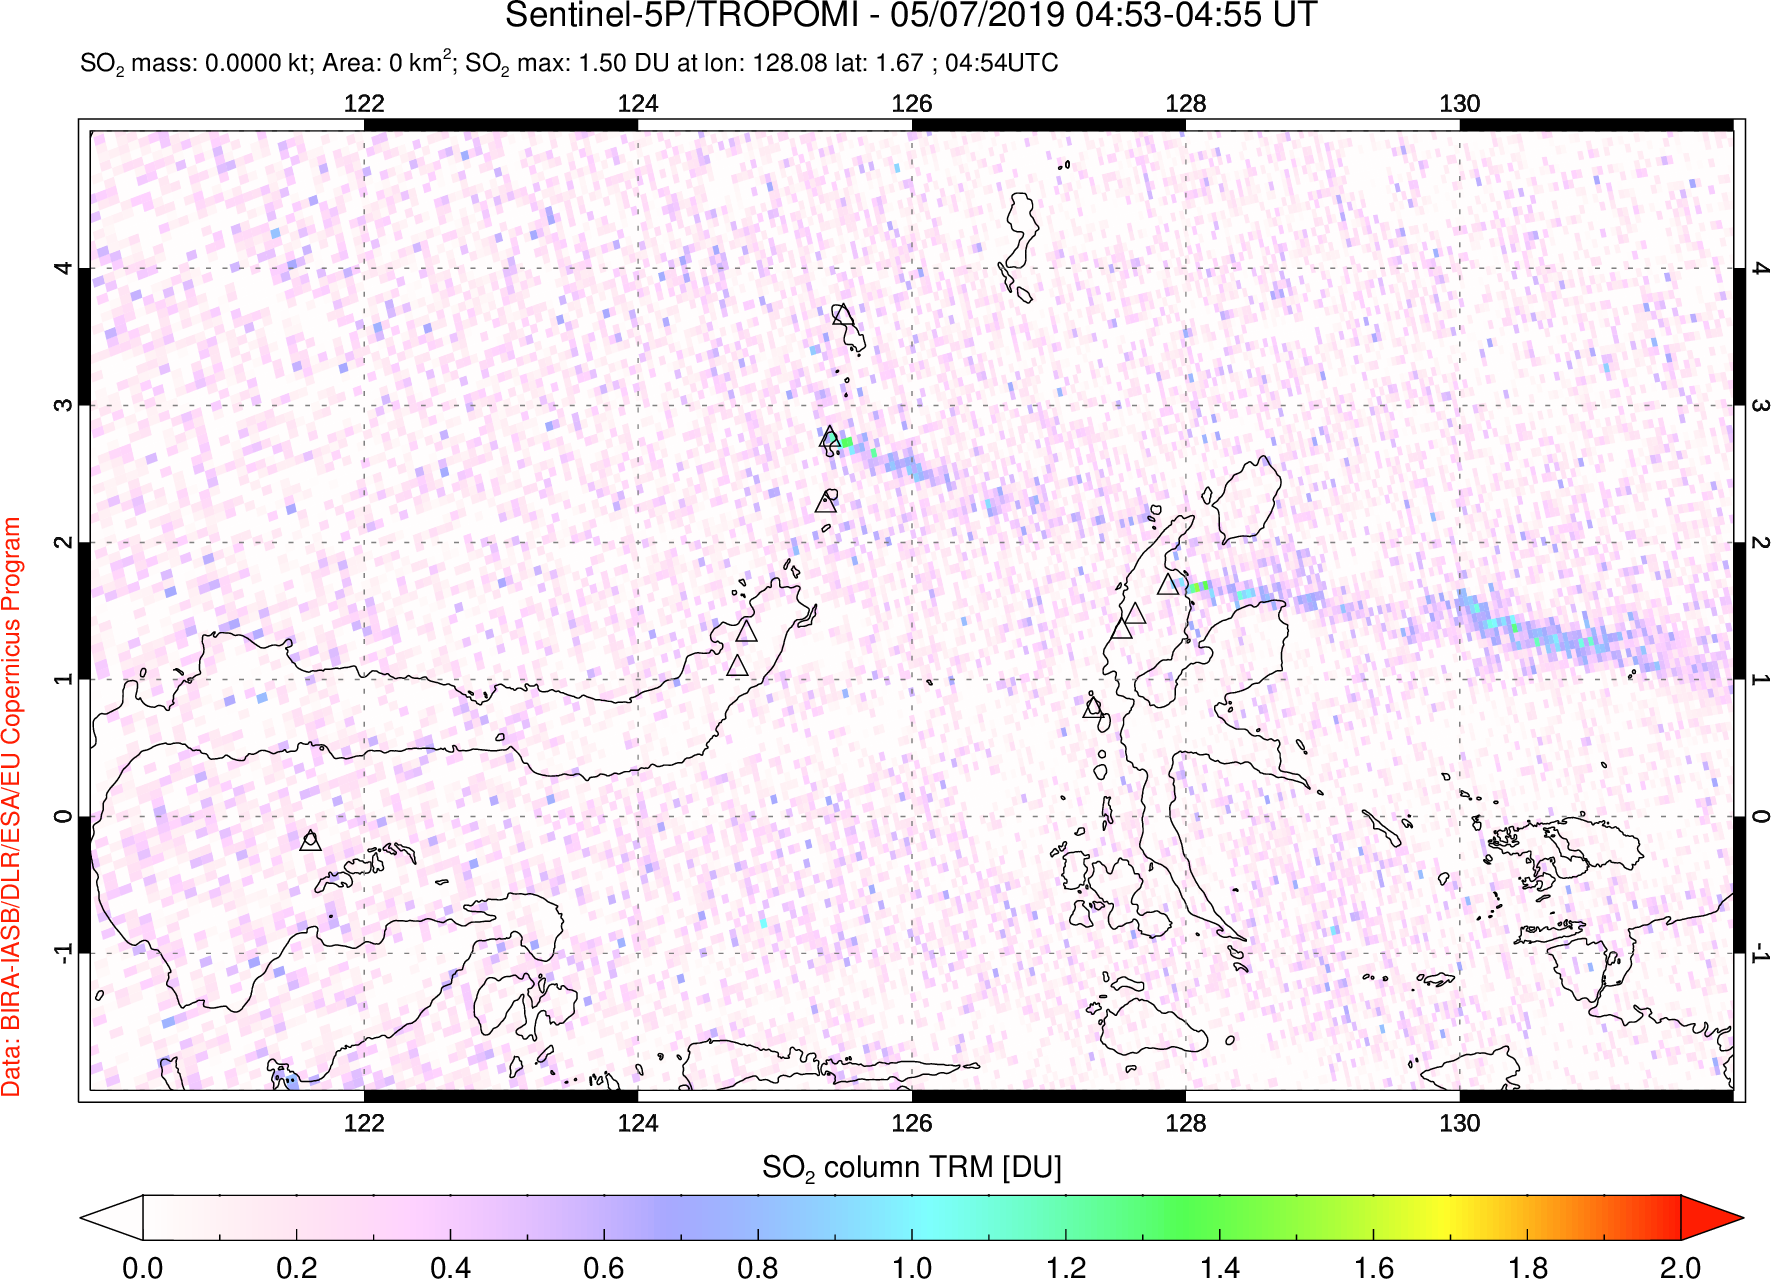 A sulfur dioxide image over Northern Sulawesi & Halmahera, Indonesia on May 07, 2019.